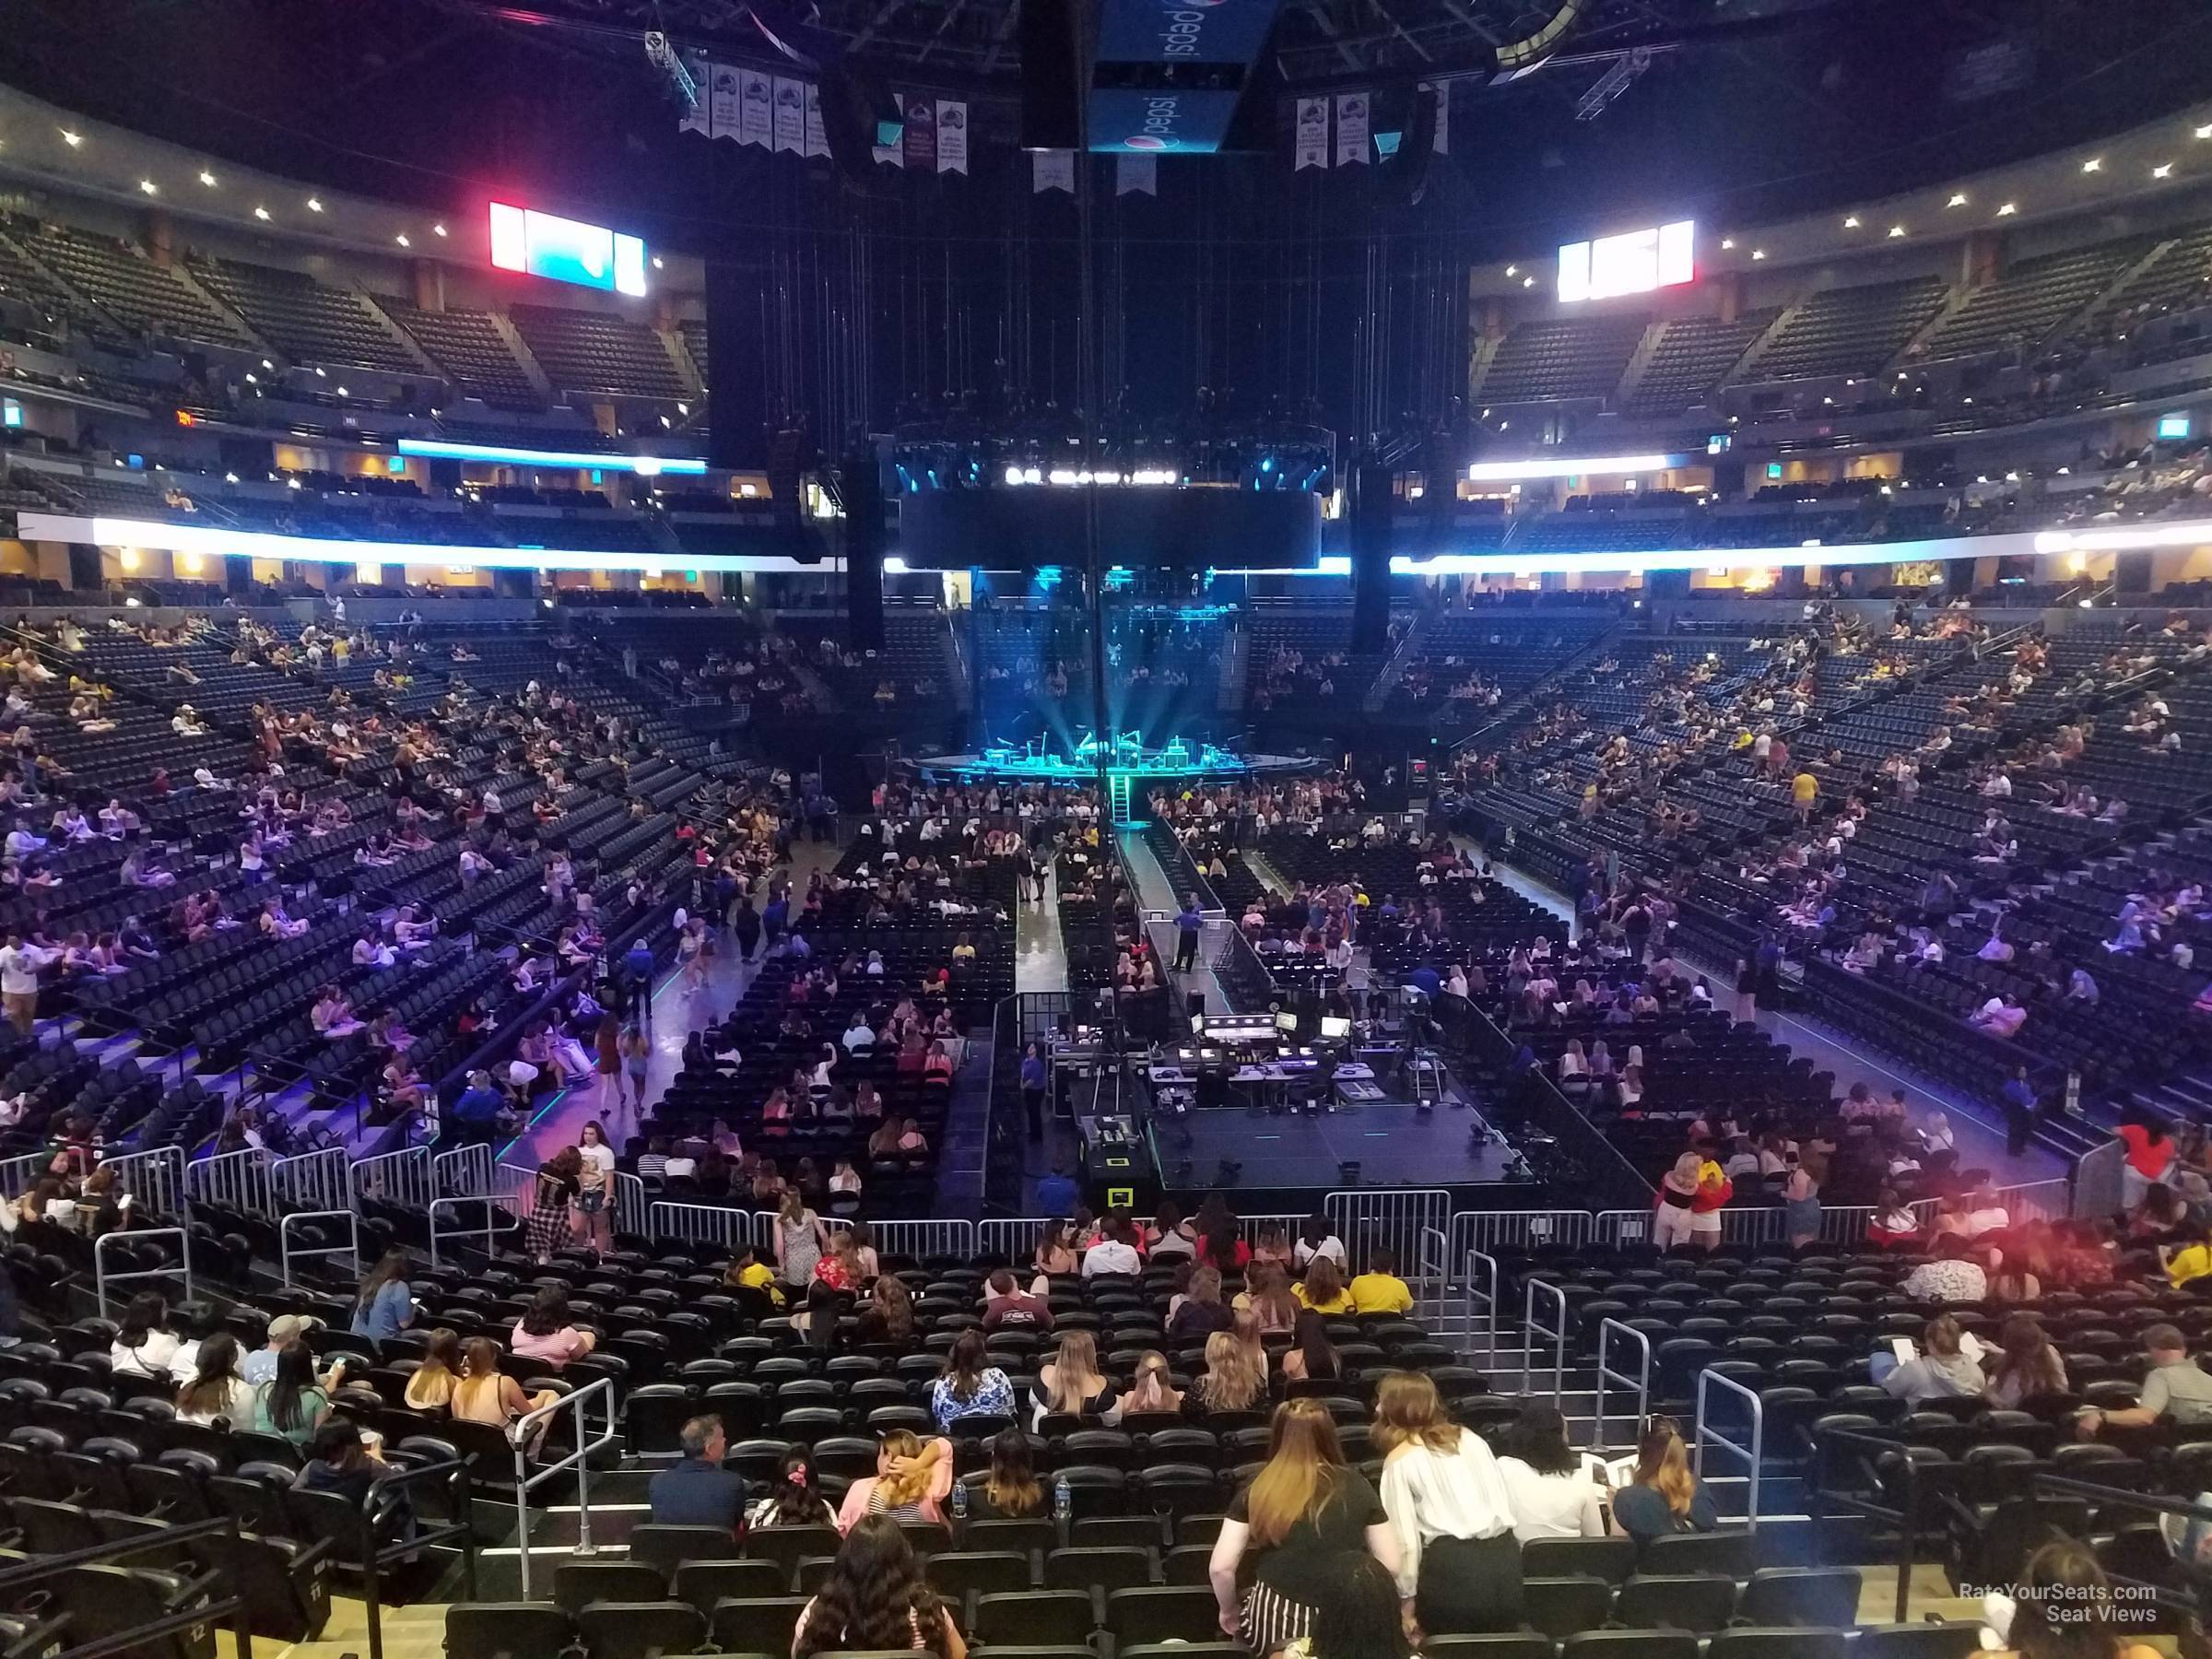 Pepsi Center Section 114 Concert Seating - RateYourSeats.com